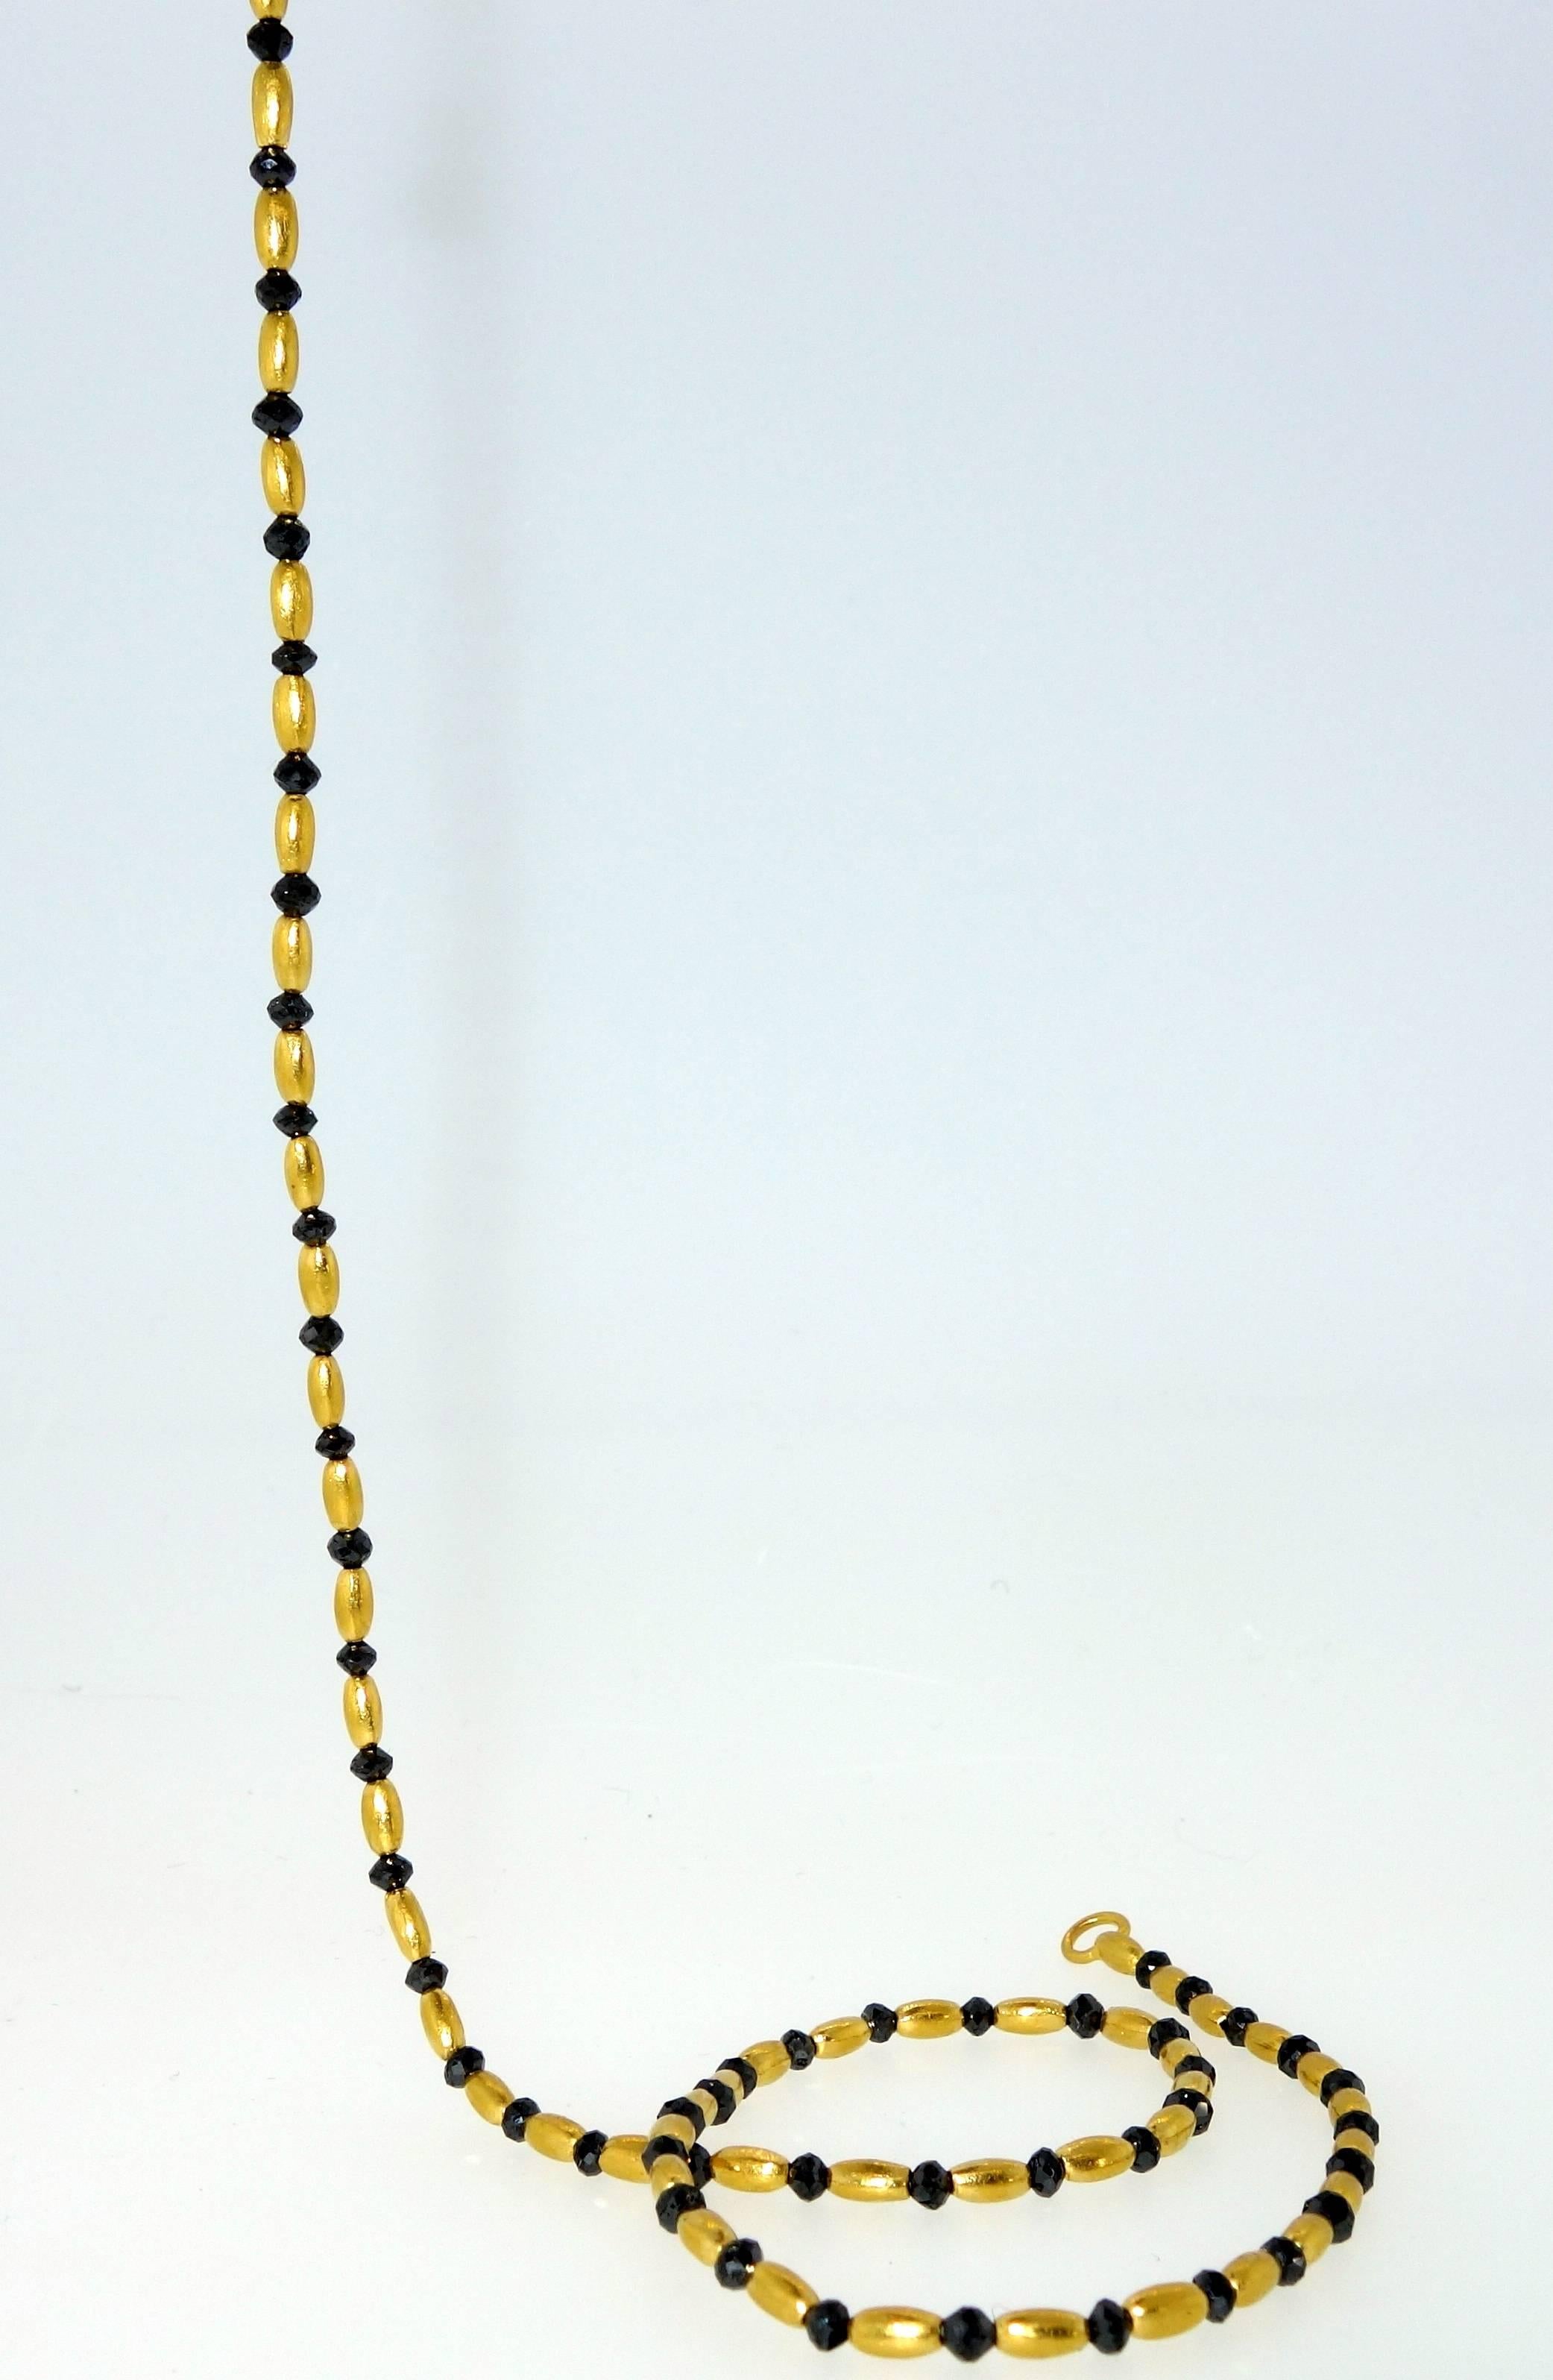 .99 % pure gold necklace interspersed with 62 faceted black diamonds amounting to approximately 6.25 cts.  This necklace is 17.3/4 inches long and weighing 12.07 grams.  This necklace is available at the Gurhan Boutique in NYC at about triple our